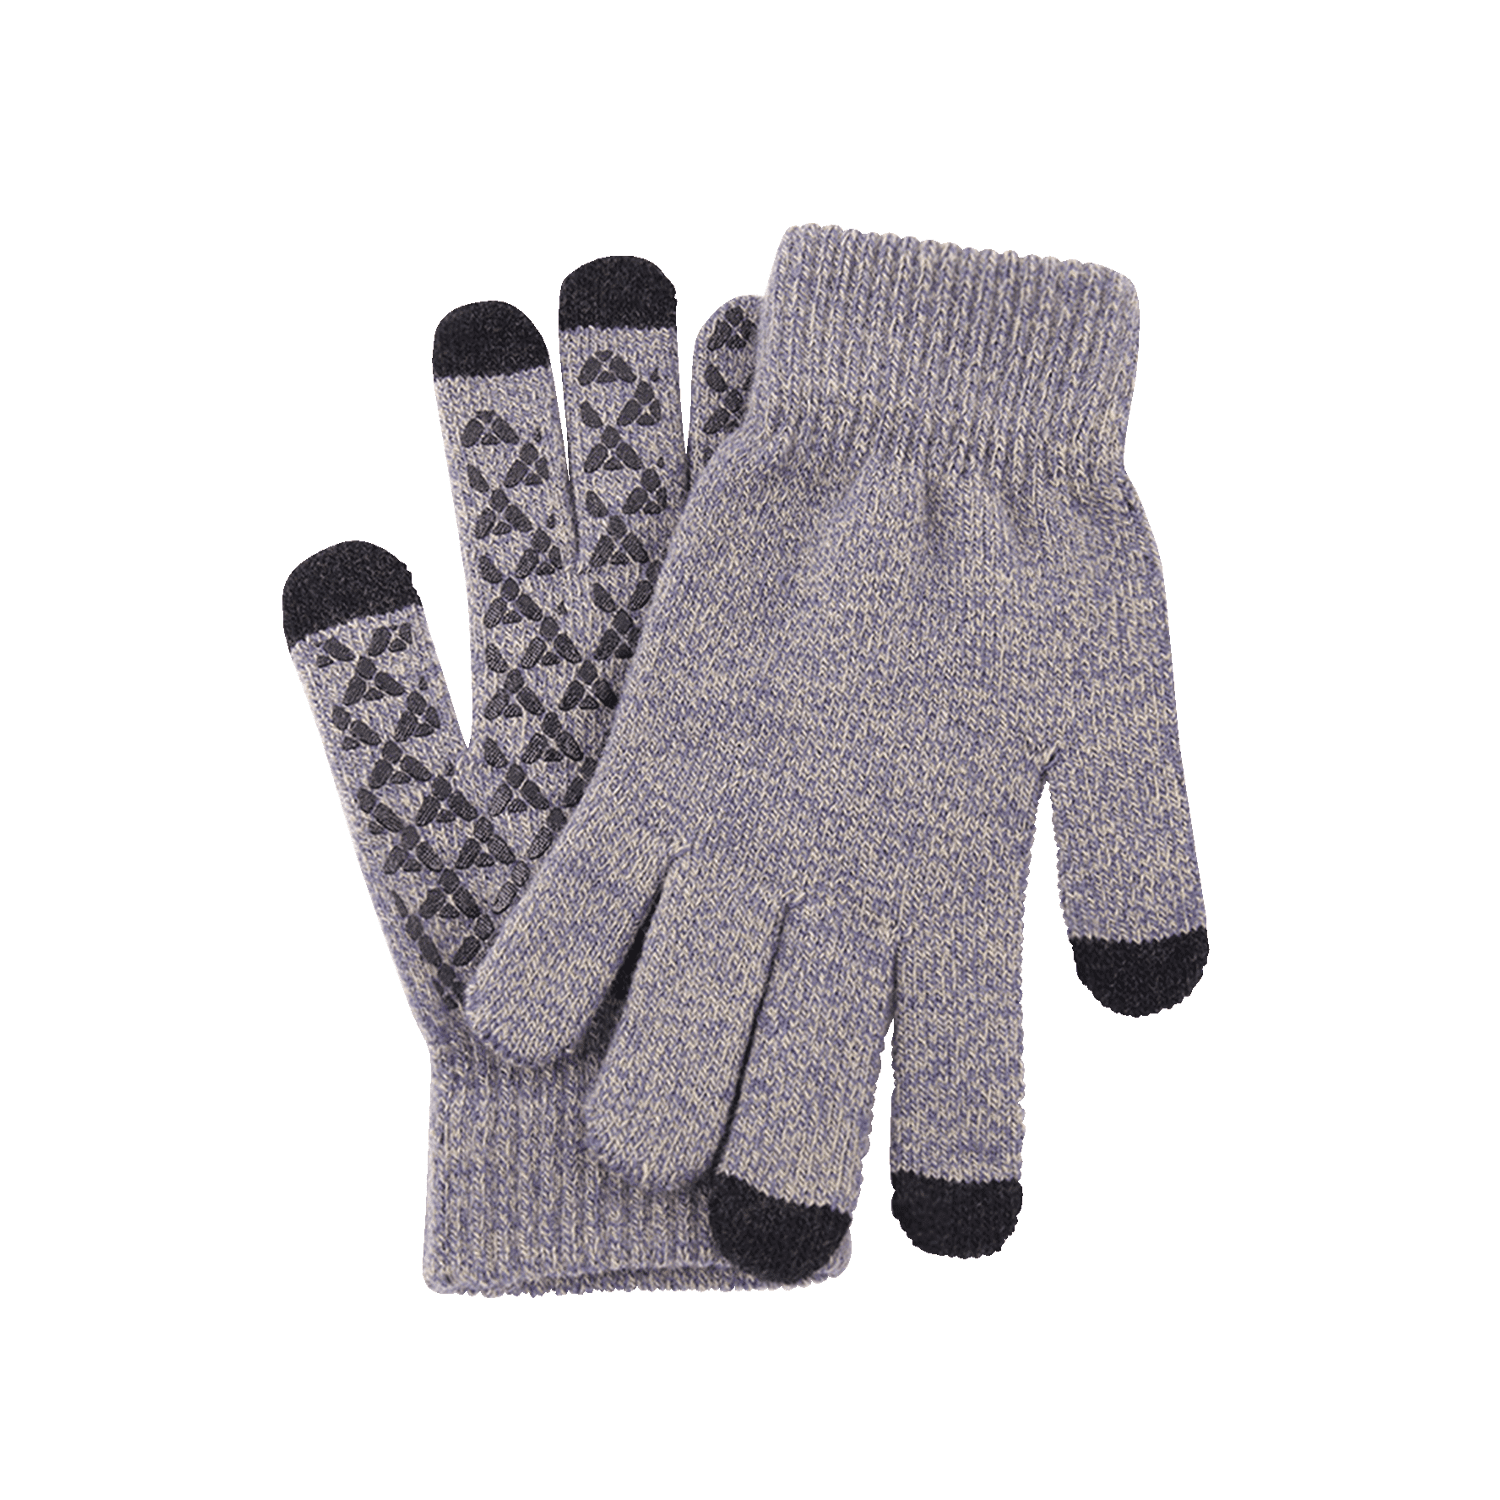 Warm & Cozy Winter Gloves Details about   NEW Adult Gray-H/G 